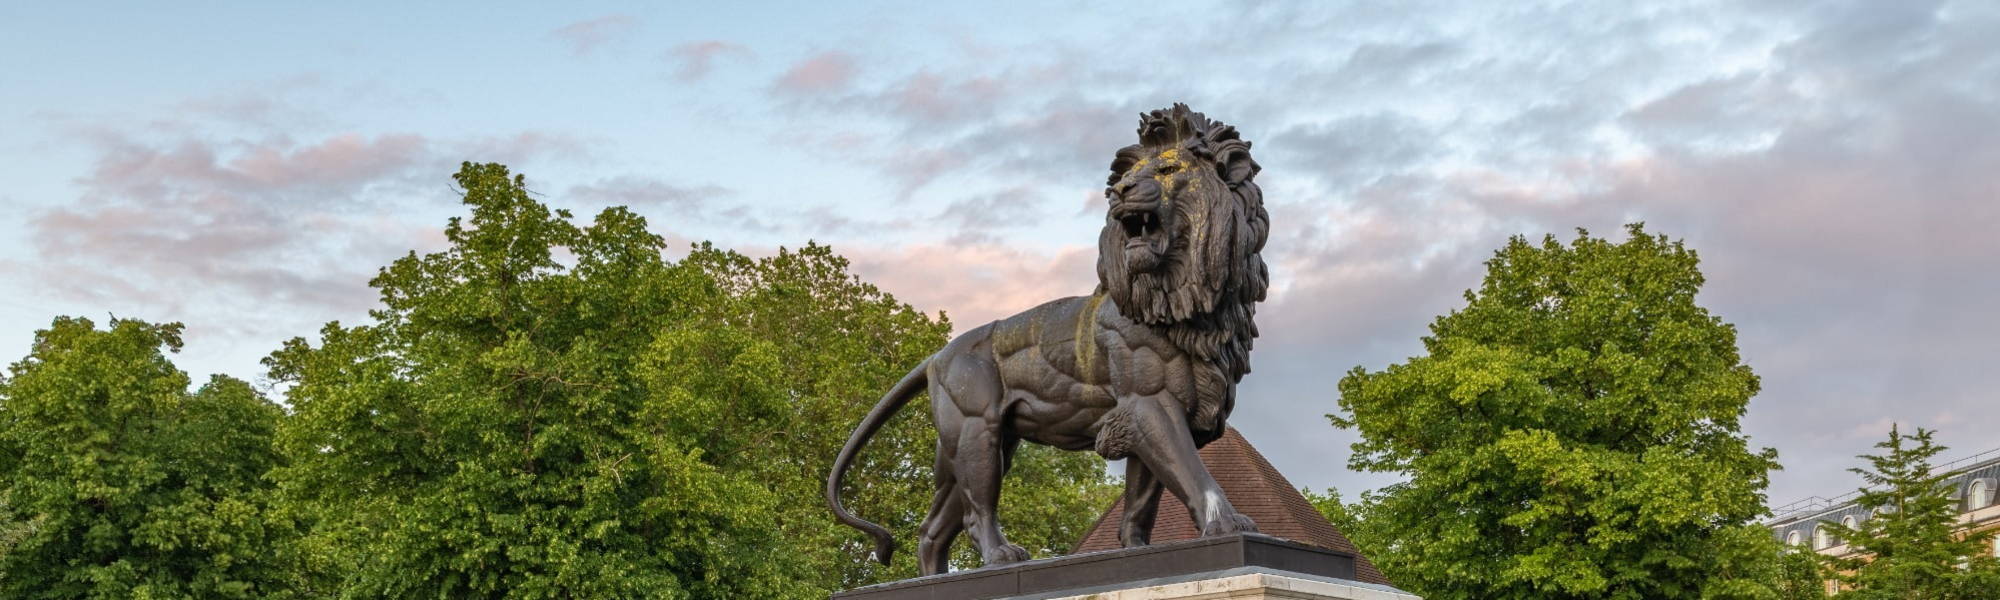 statue of a lion in reading, UK